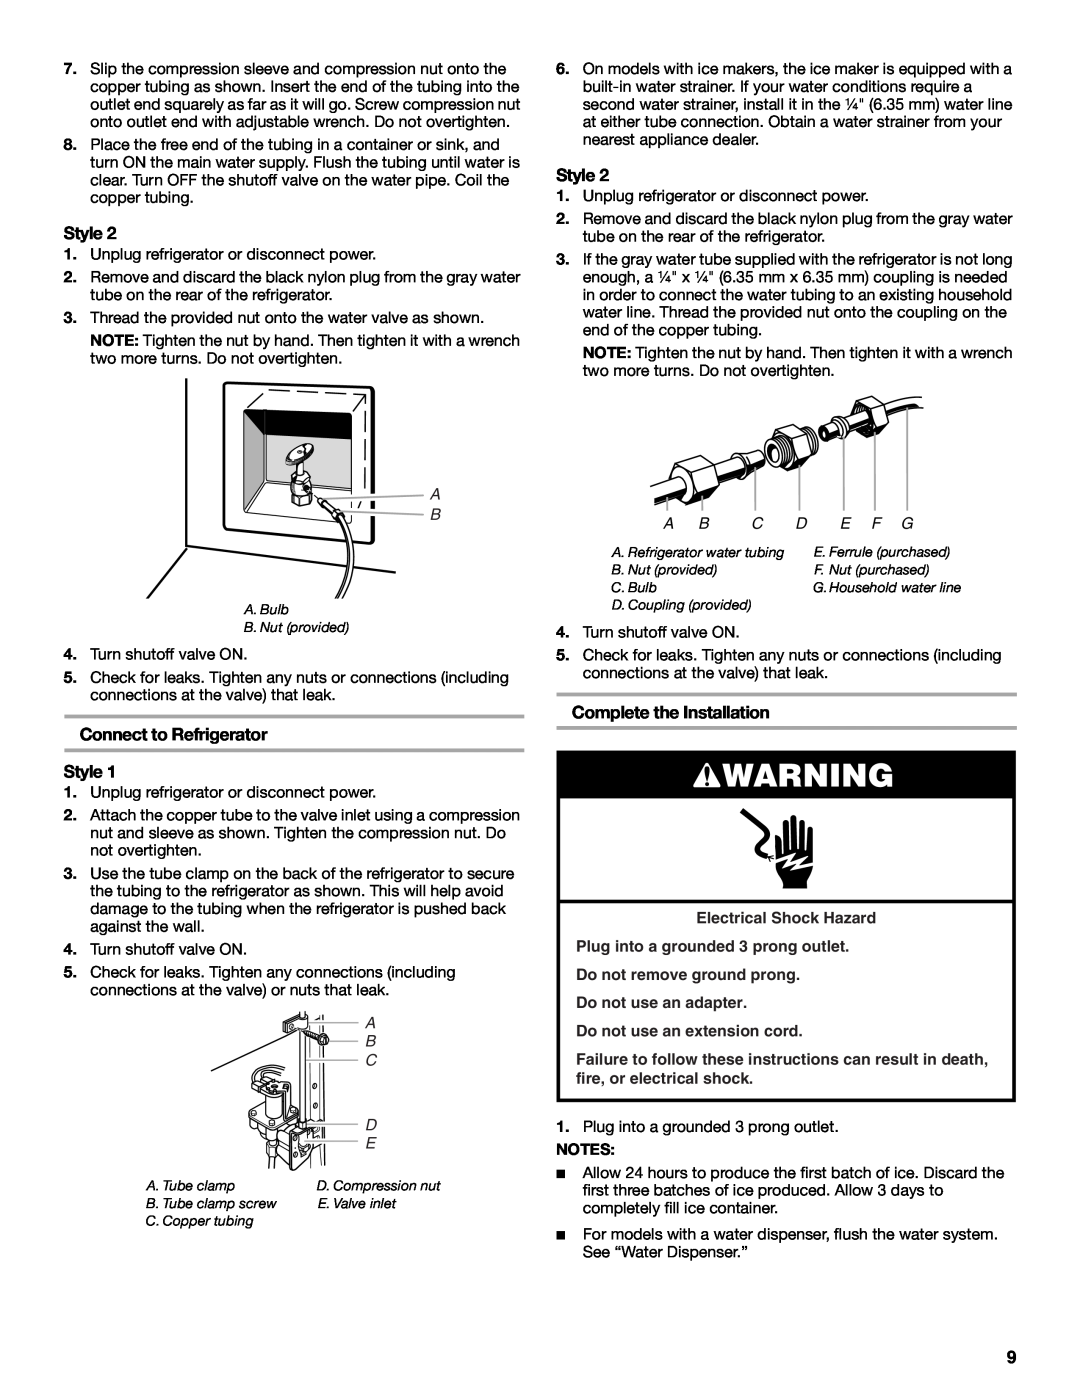 Maytag W10400978A Connect to Refrigerator Style, Complete the Installation, E F G, Do not use an extension cord 